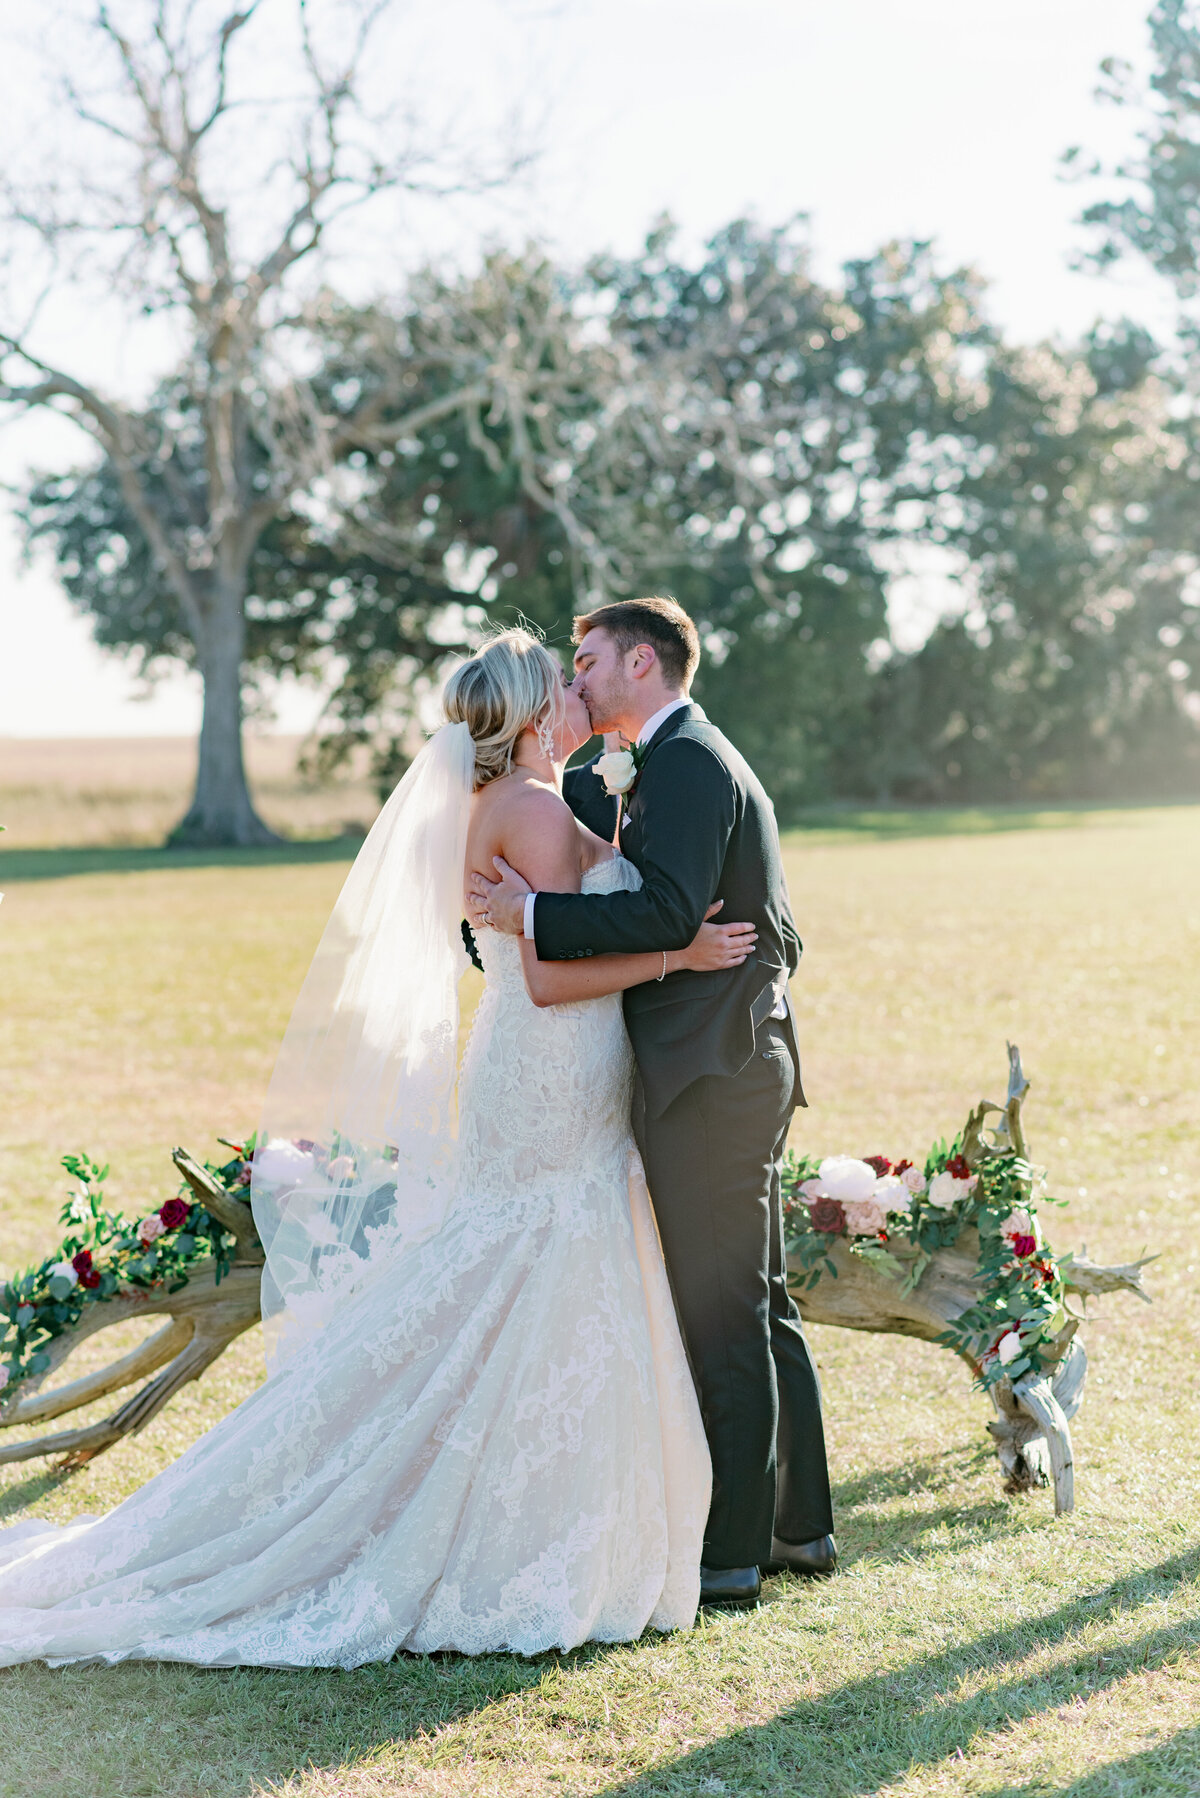 Where to get married in Beaufort South Carolina or Hilton Head